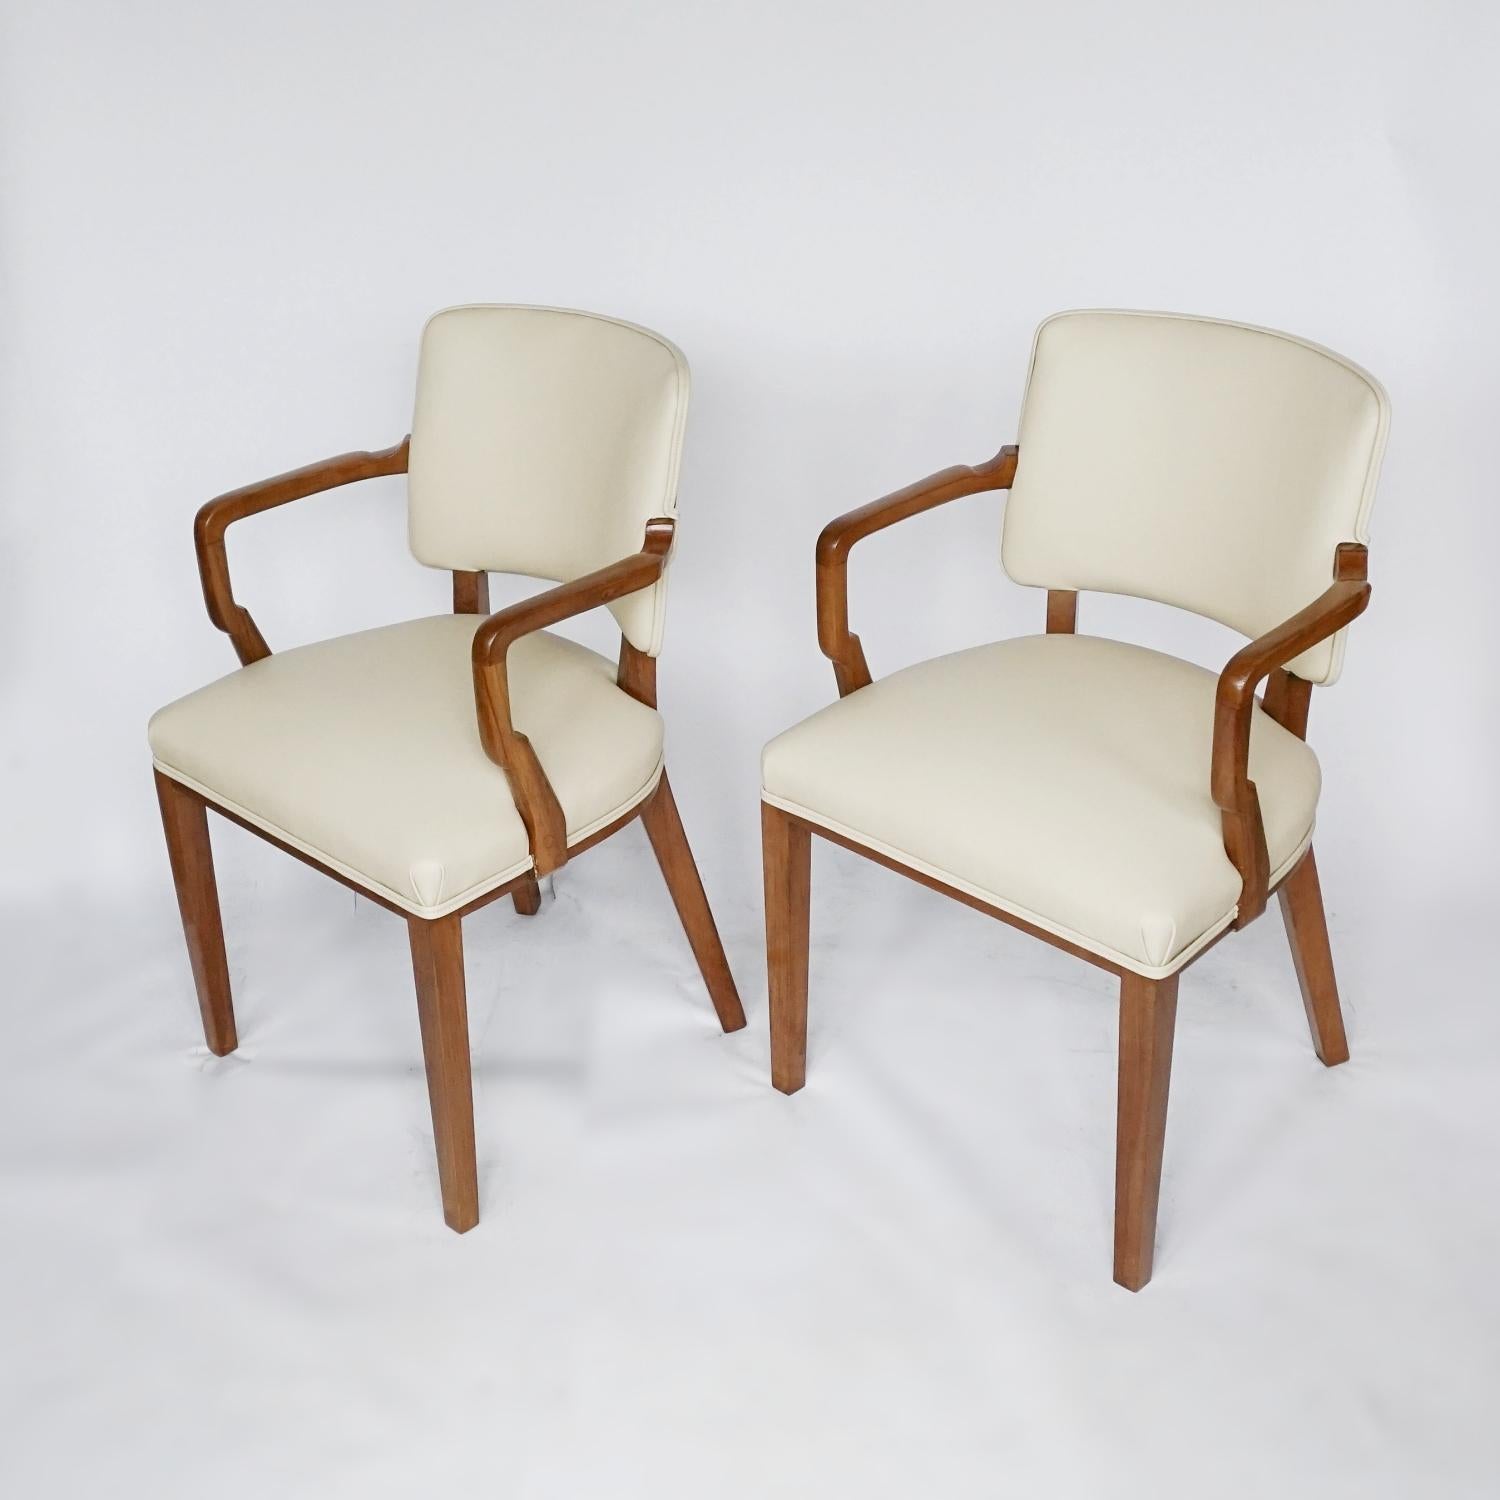 Leather Pair of Art Deco Desk Chairs by Heal's of London Circa 1935 English